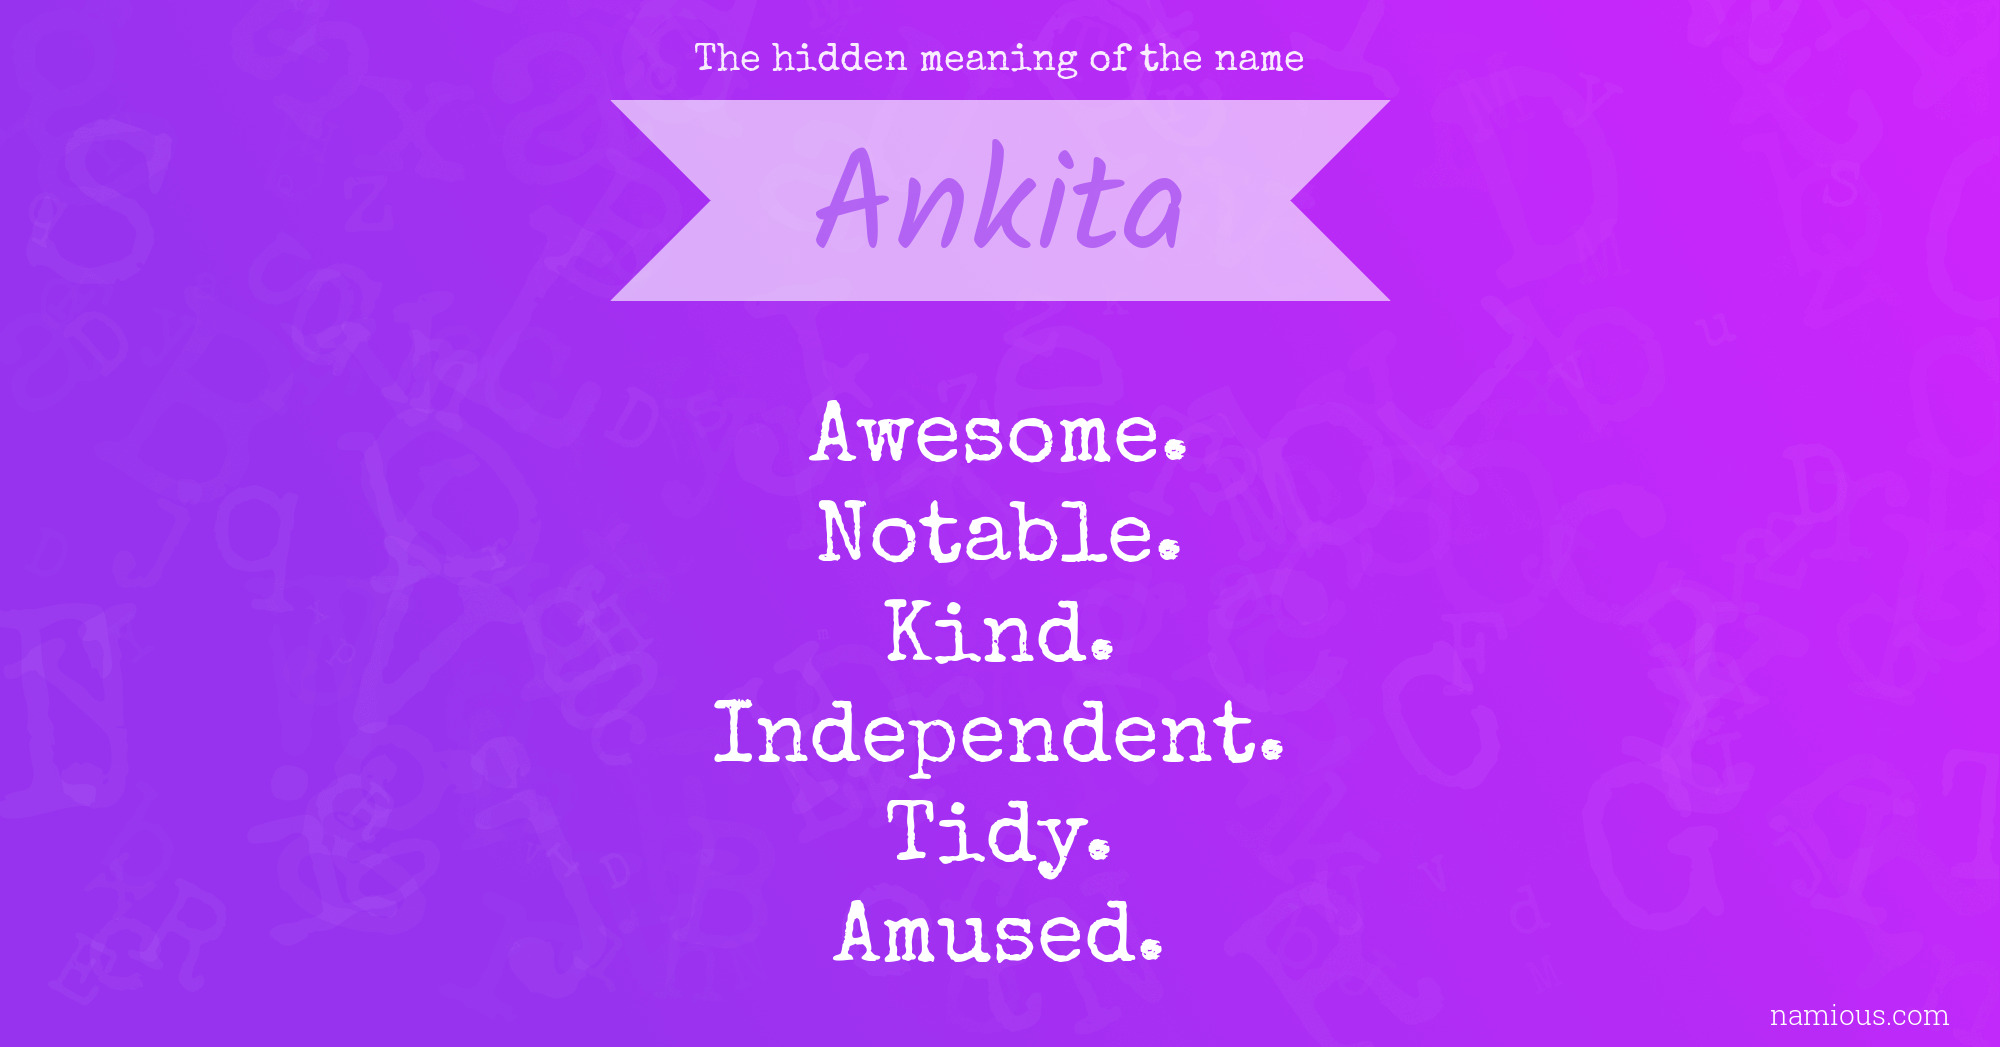 The hidden meaning of the name Ankita